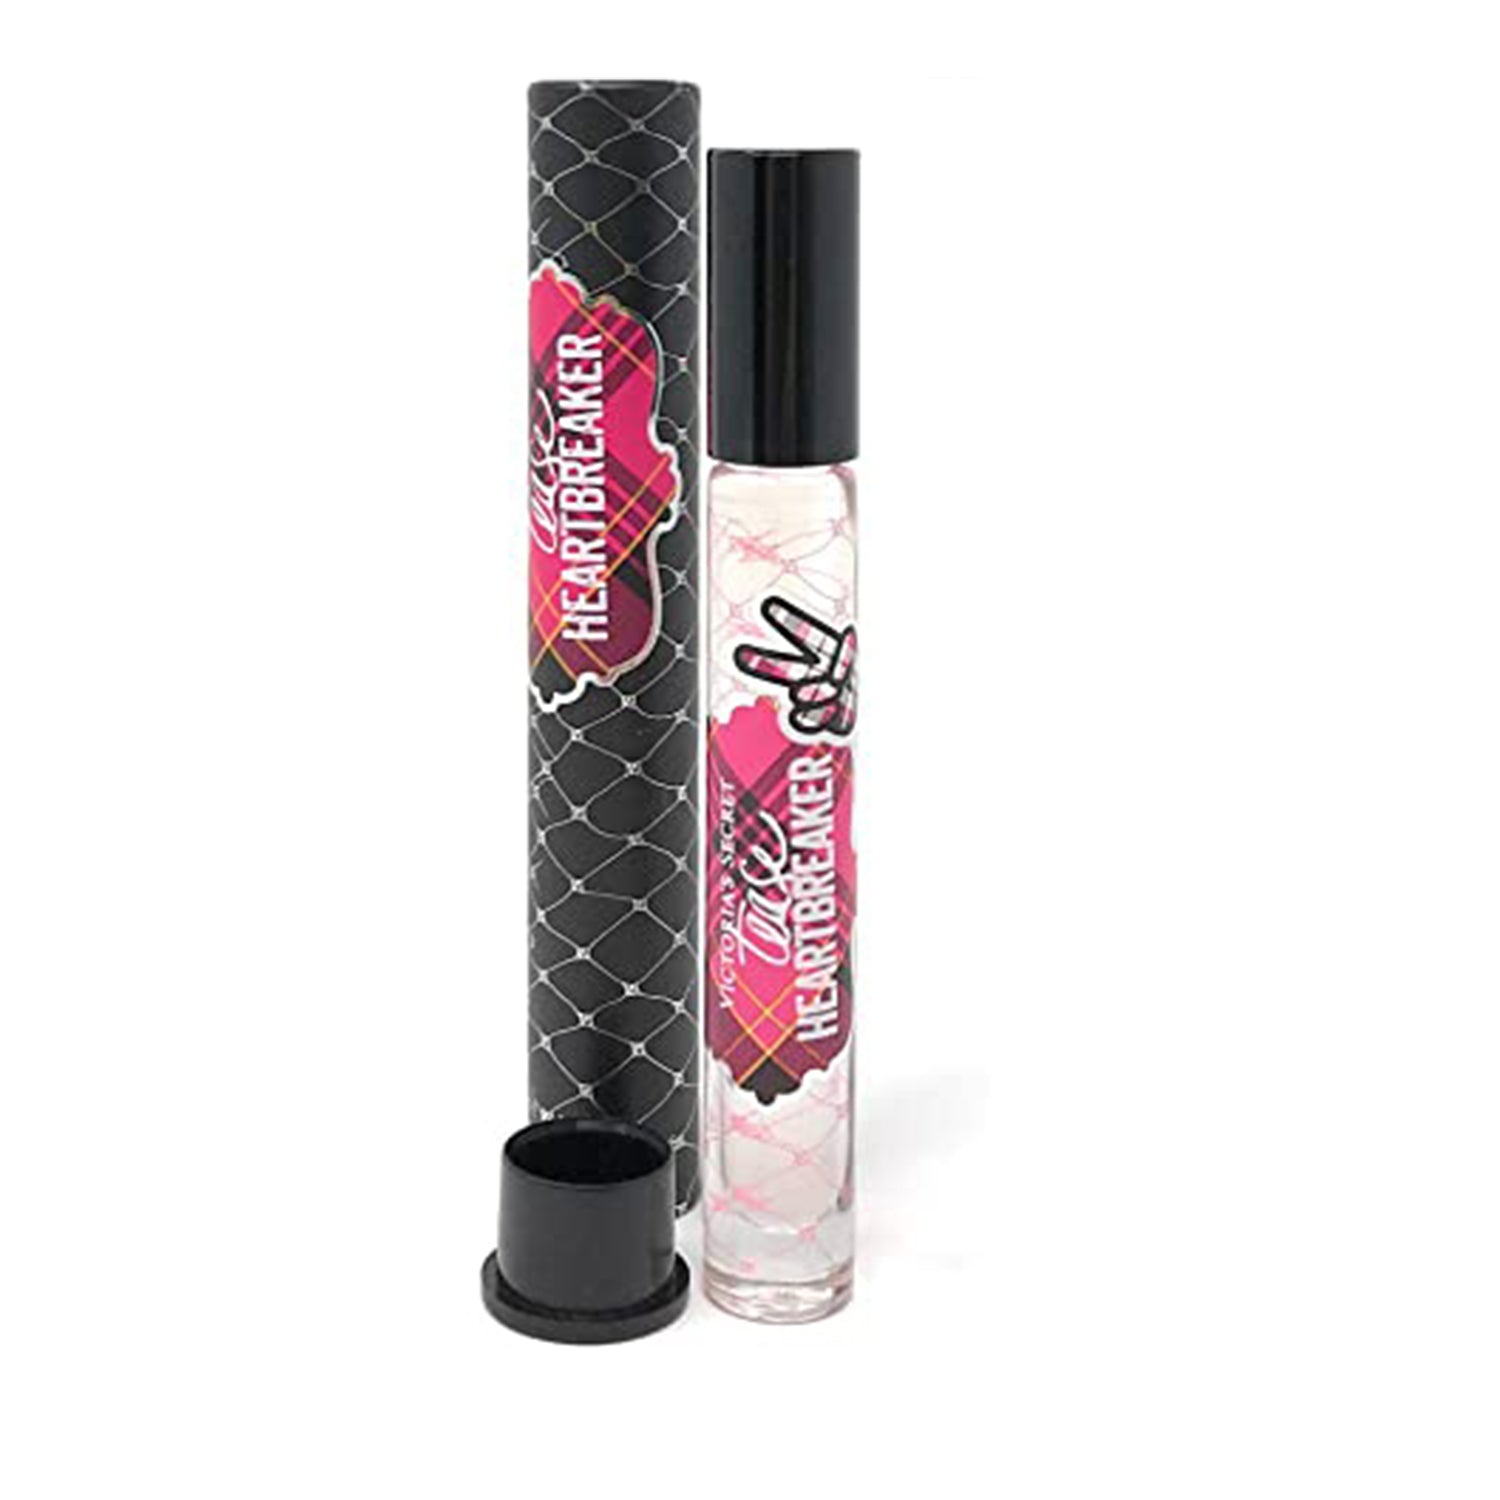 Victoria's Secret Rollerball - Tease Heartbreaker available at heygirl.pk for delivery in pakistan